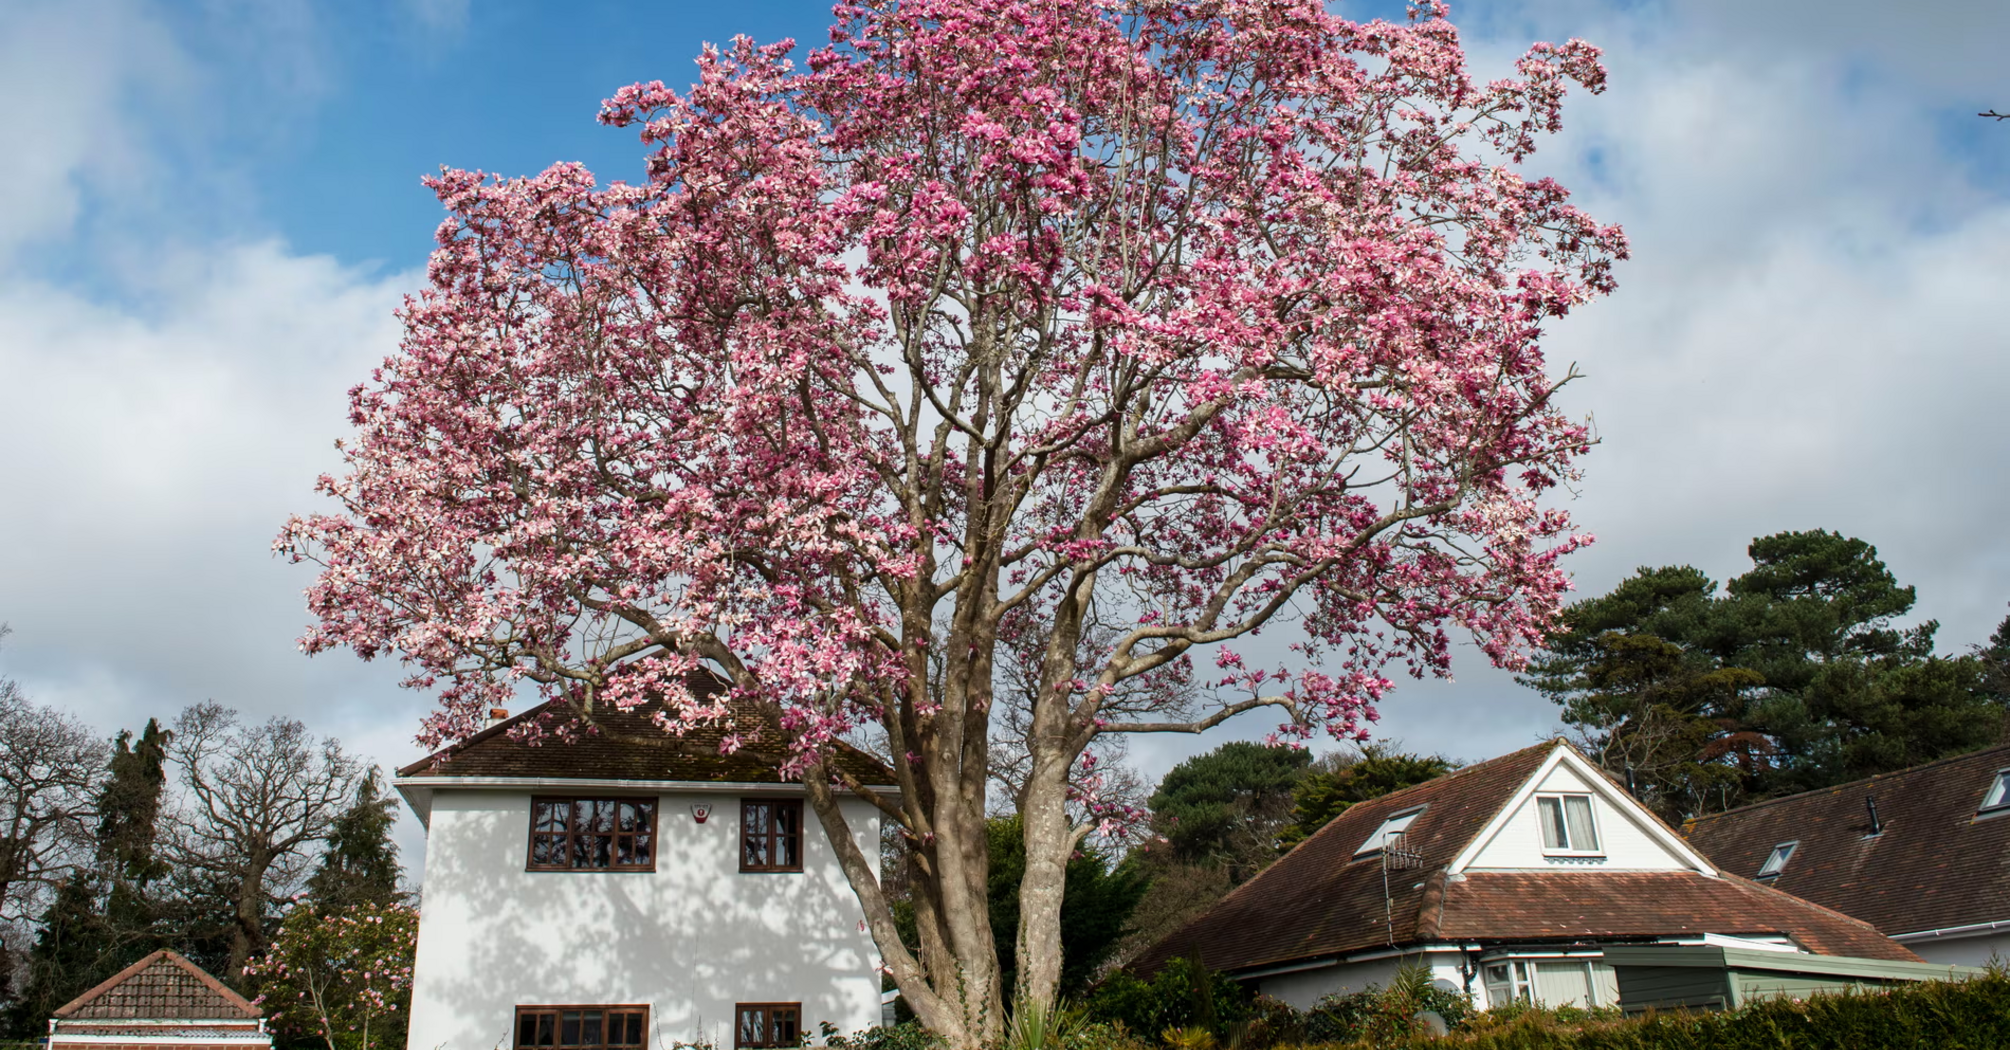 The tallest magnolia in the country was cut in the UK